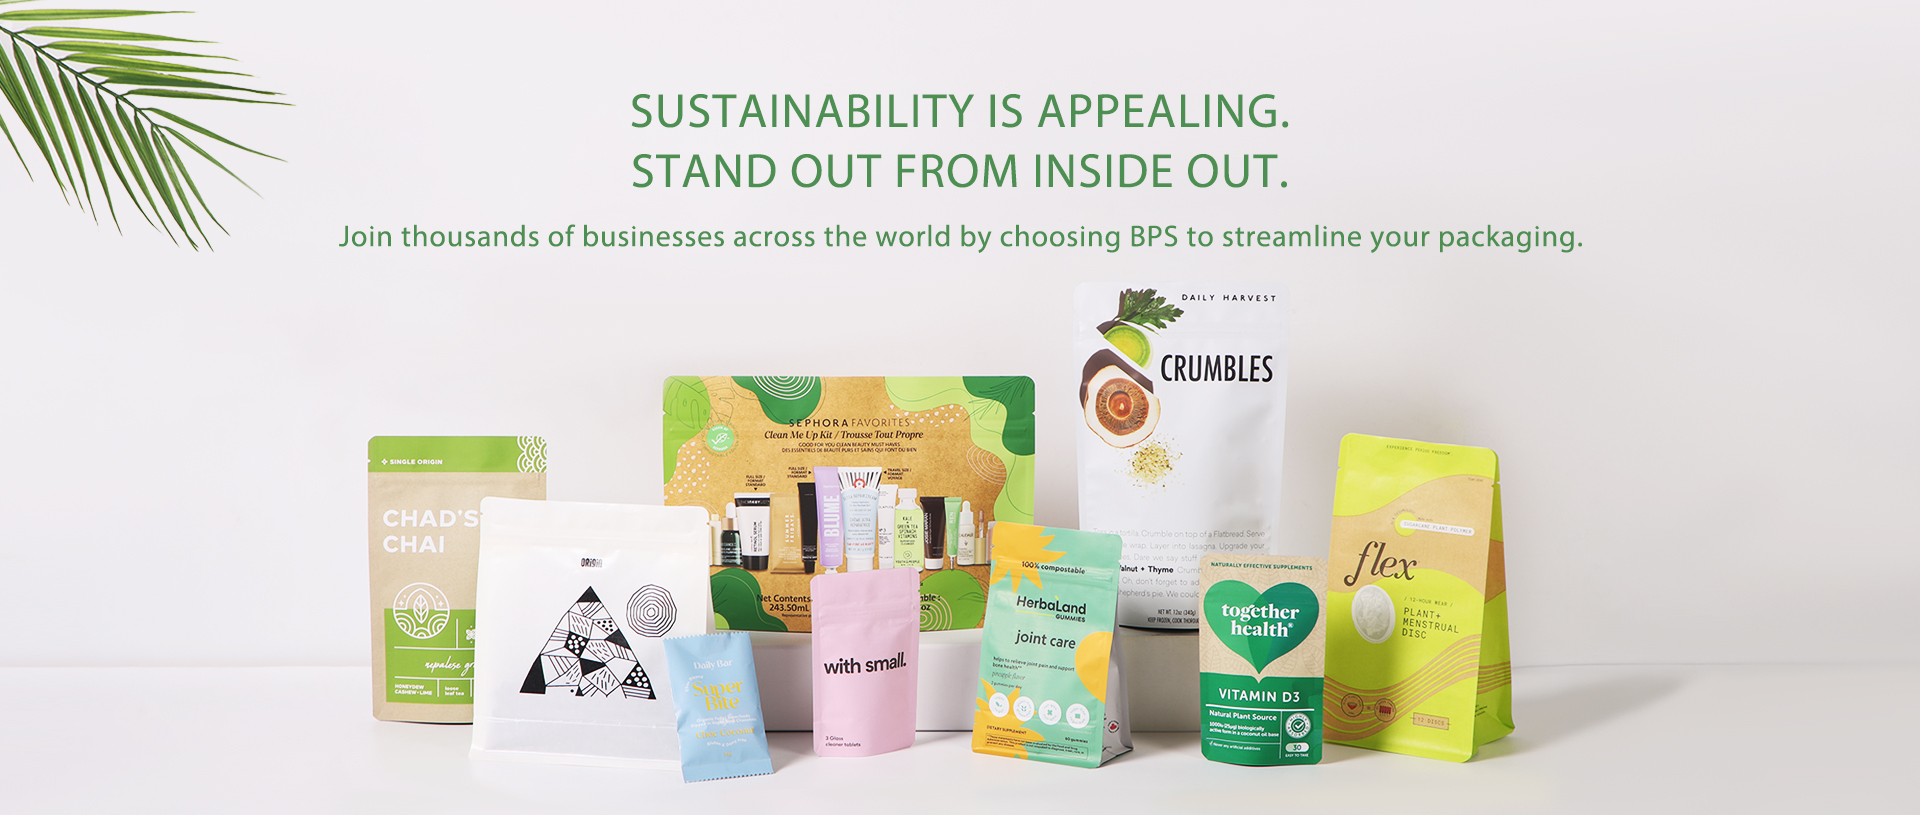 Sustainability is appealing. Stand out from inside out.